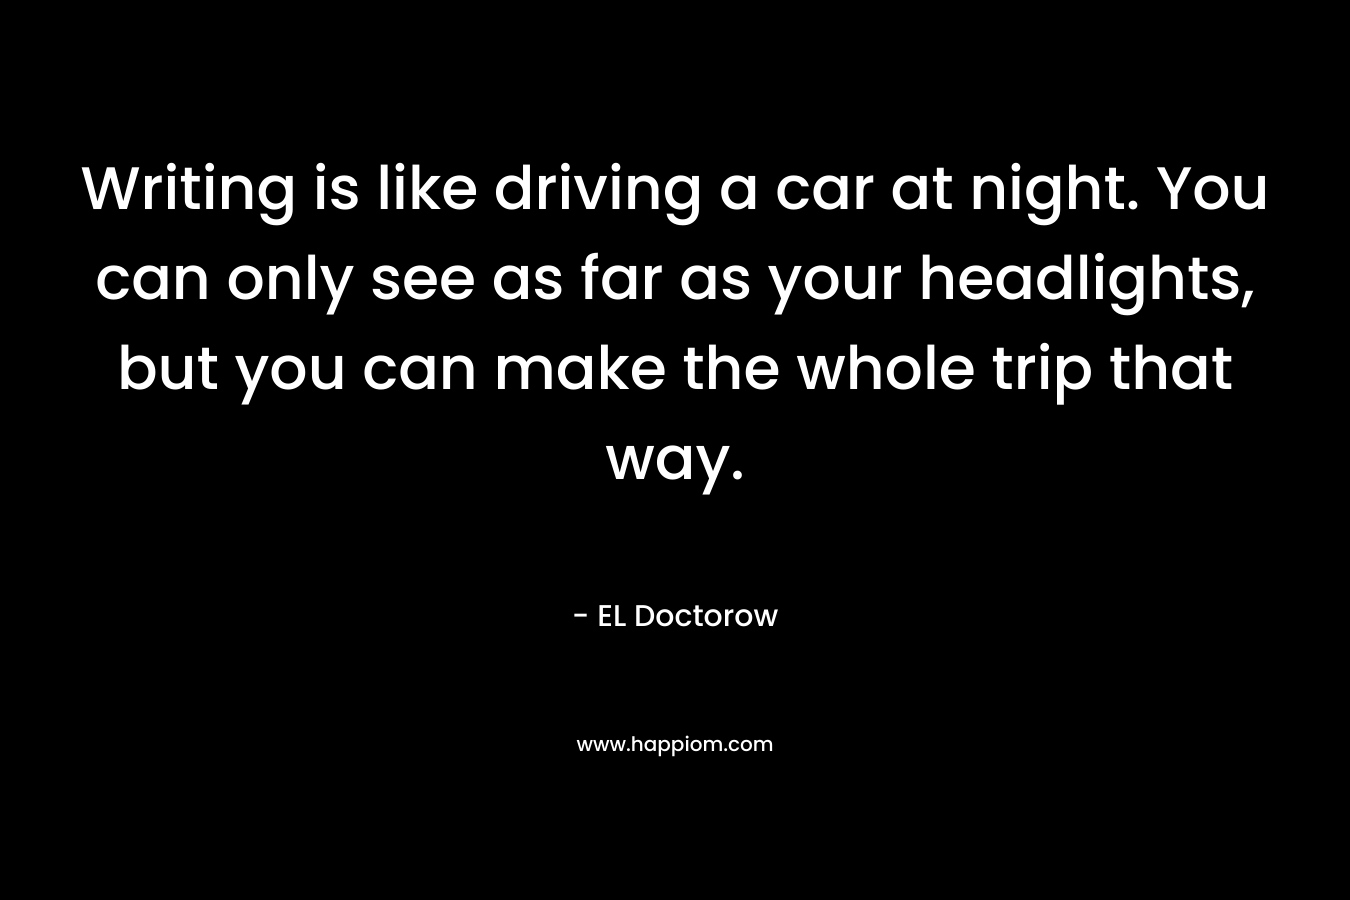 Writing is like driving a car at night. You can only see as far as your headlights, but you can make the whole trip that way.